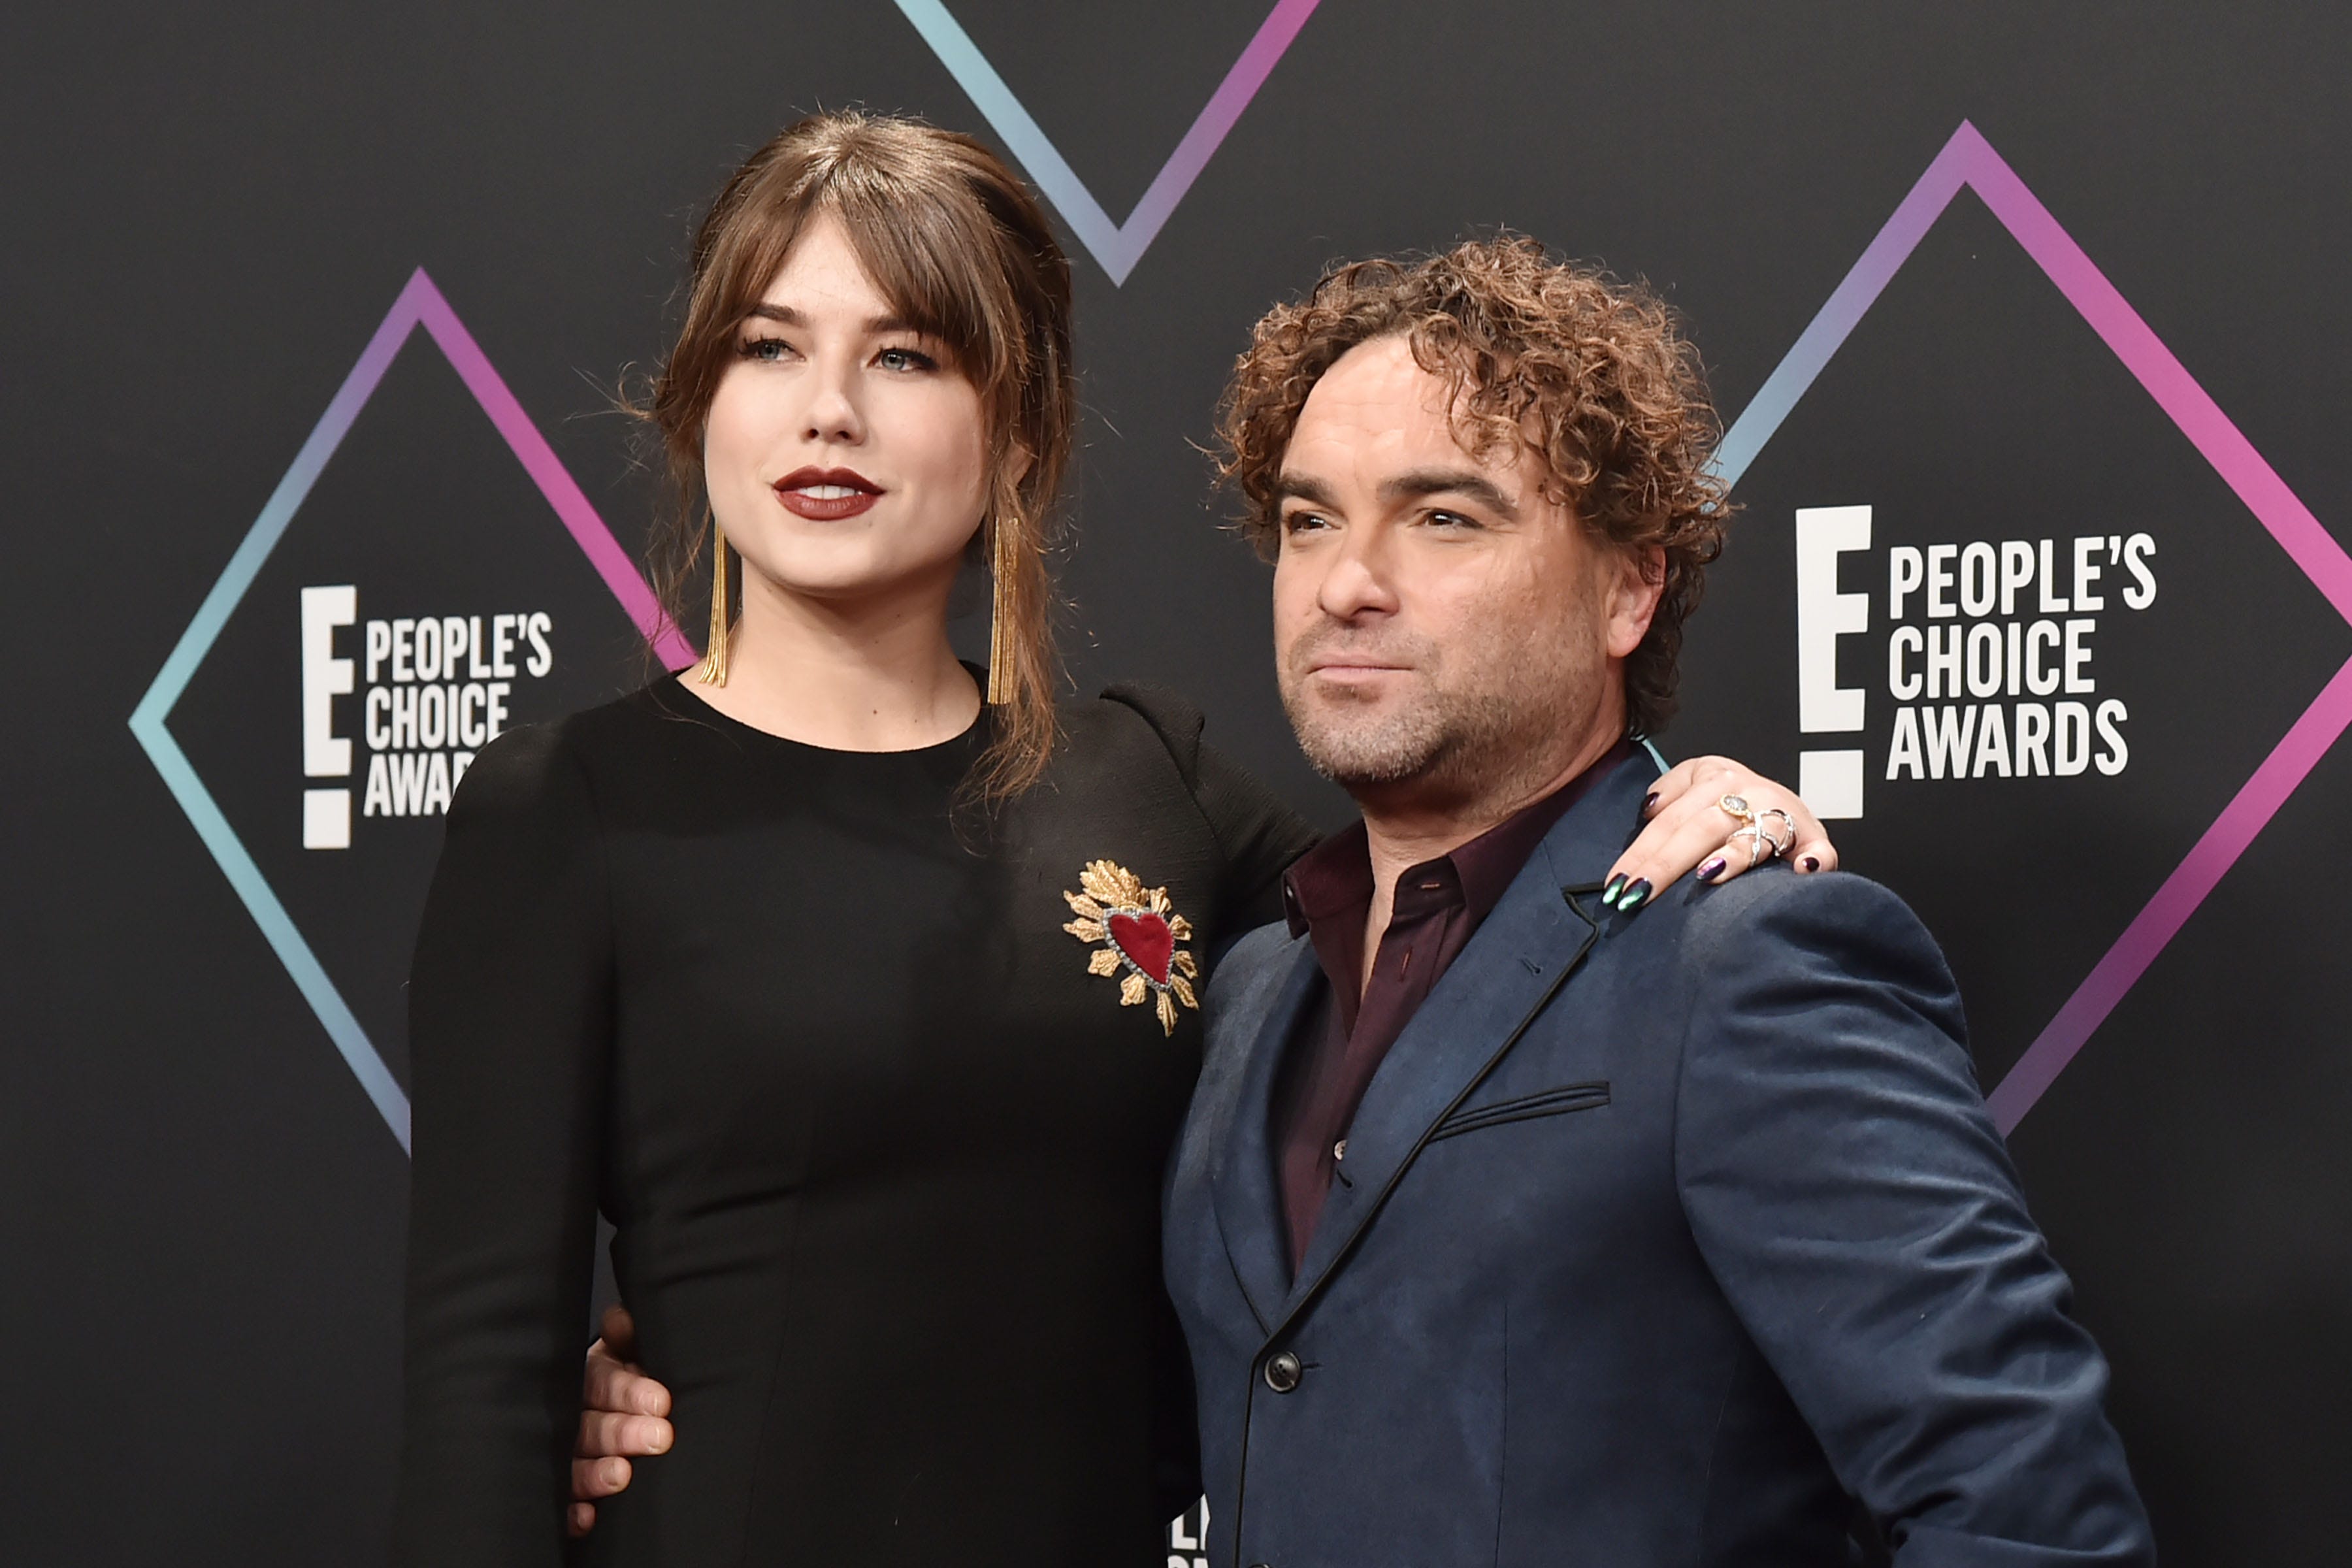 Who is johnny galecki married to